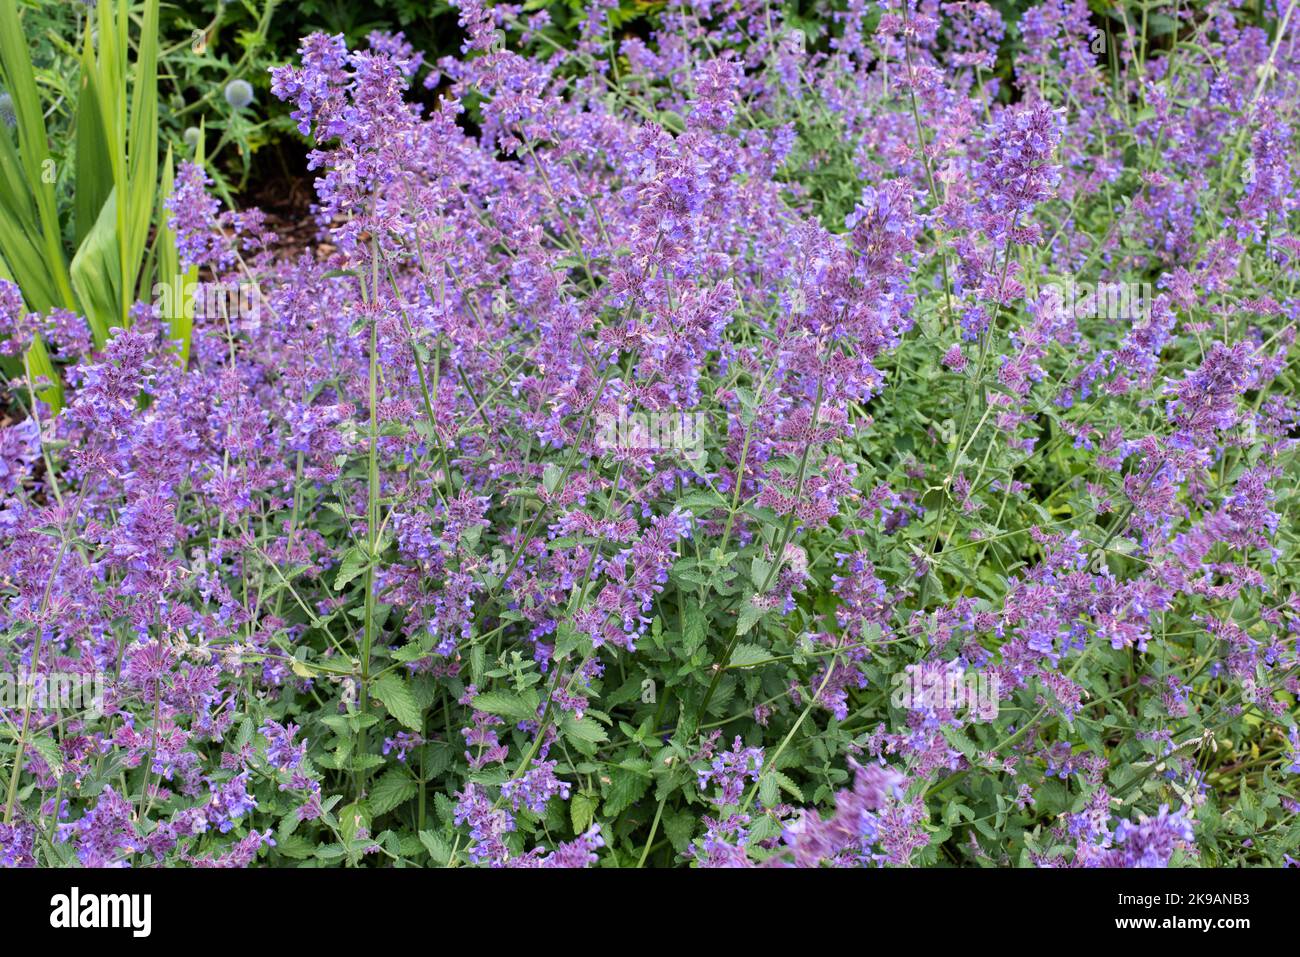 Photo taken at the National Botanic Garden Wales in July 2022 showing Nepeta - Six Hills Giant. Stock Photo